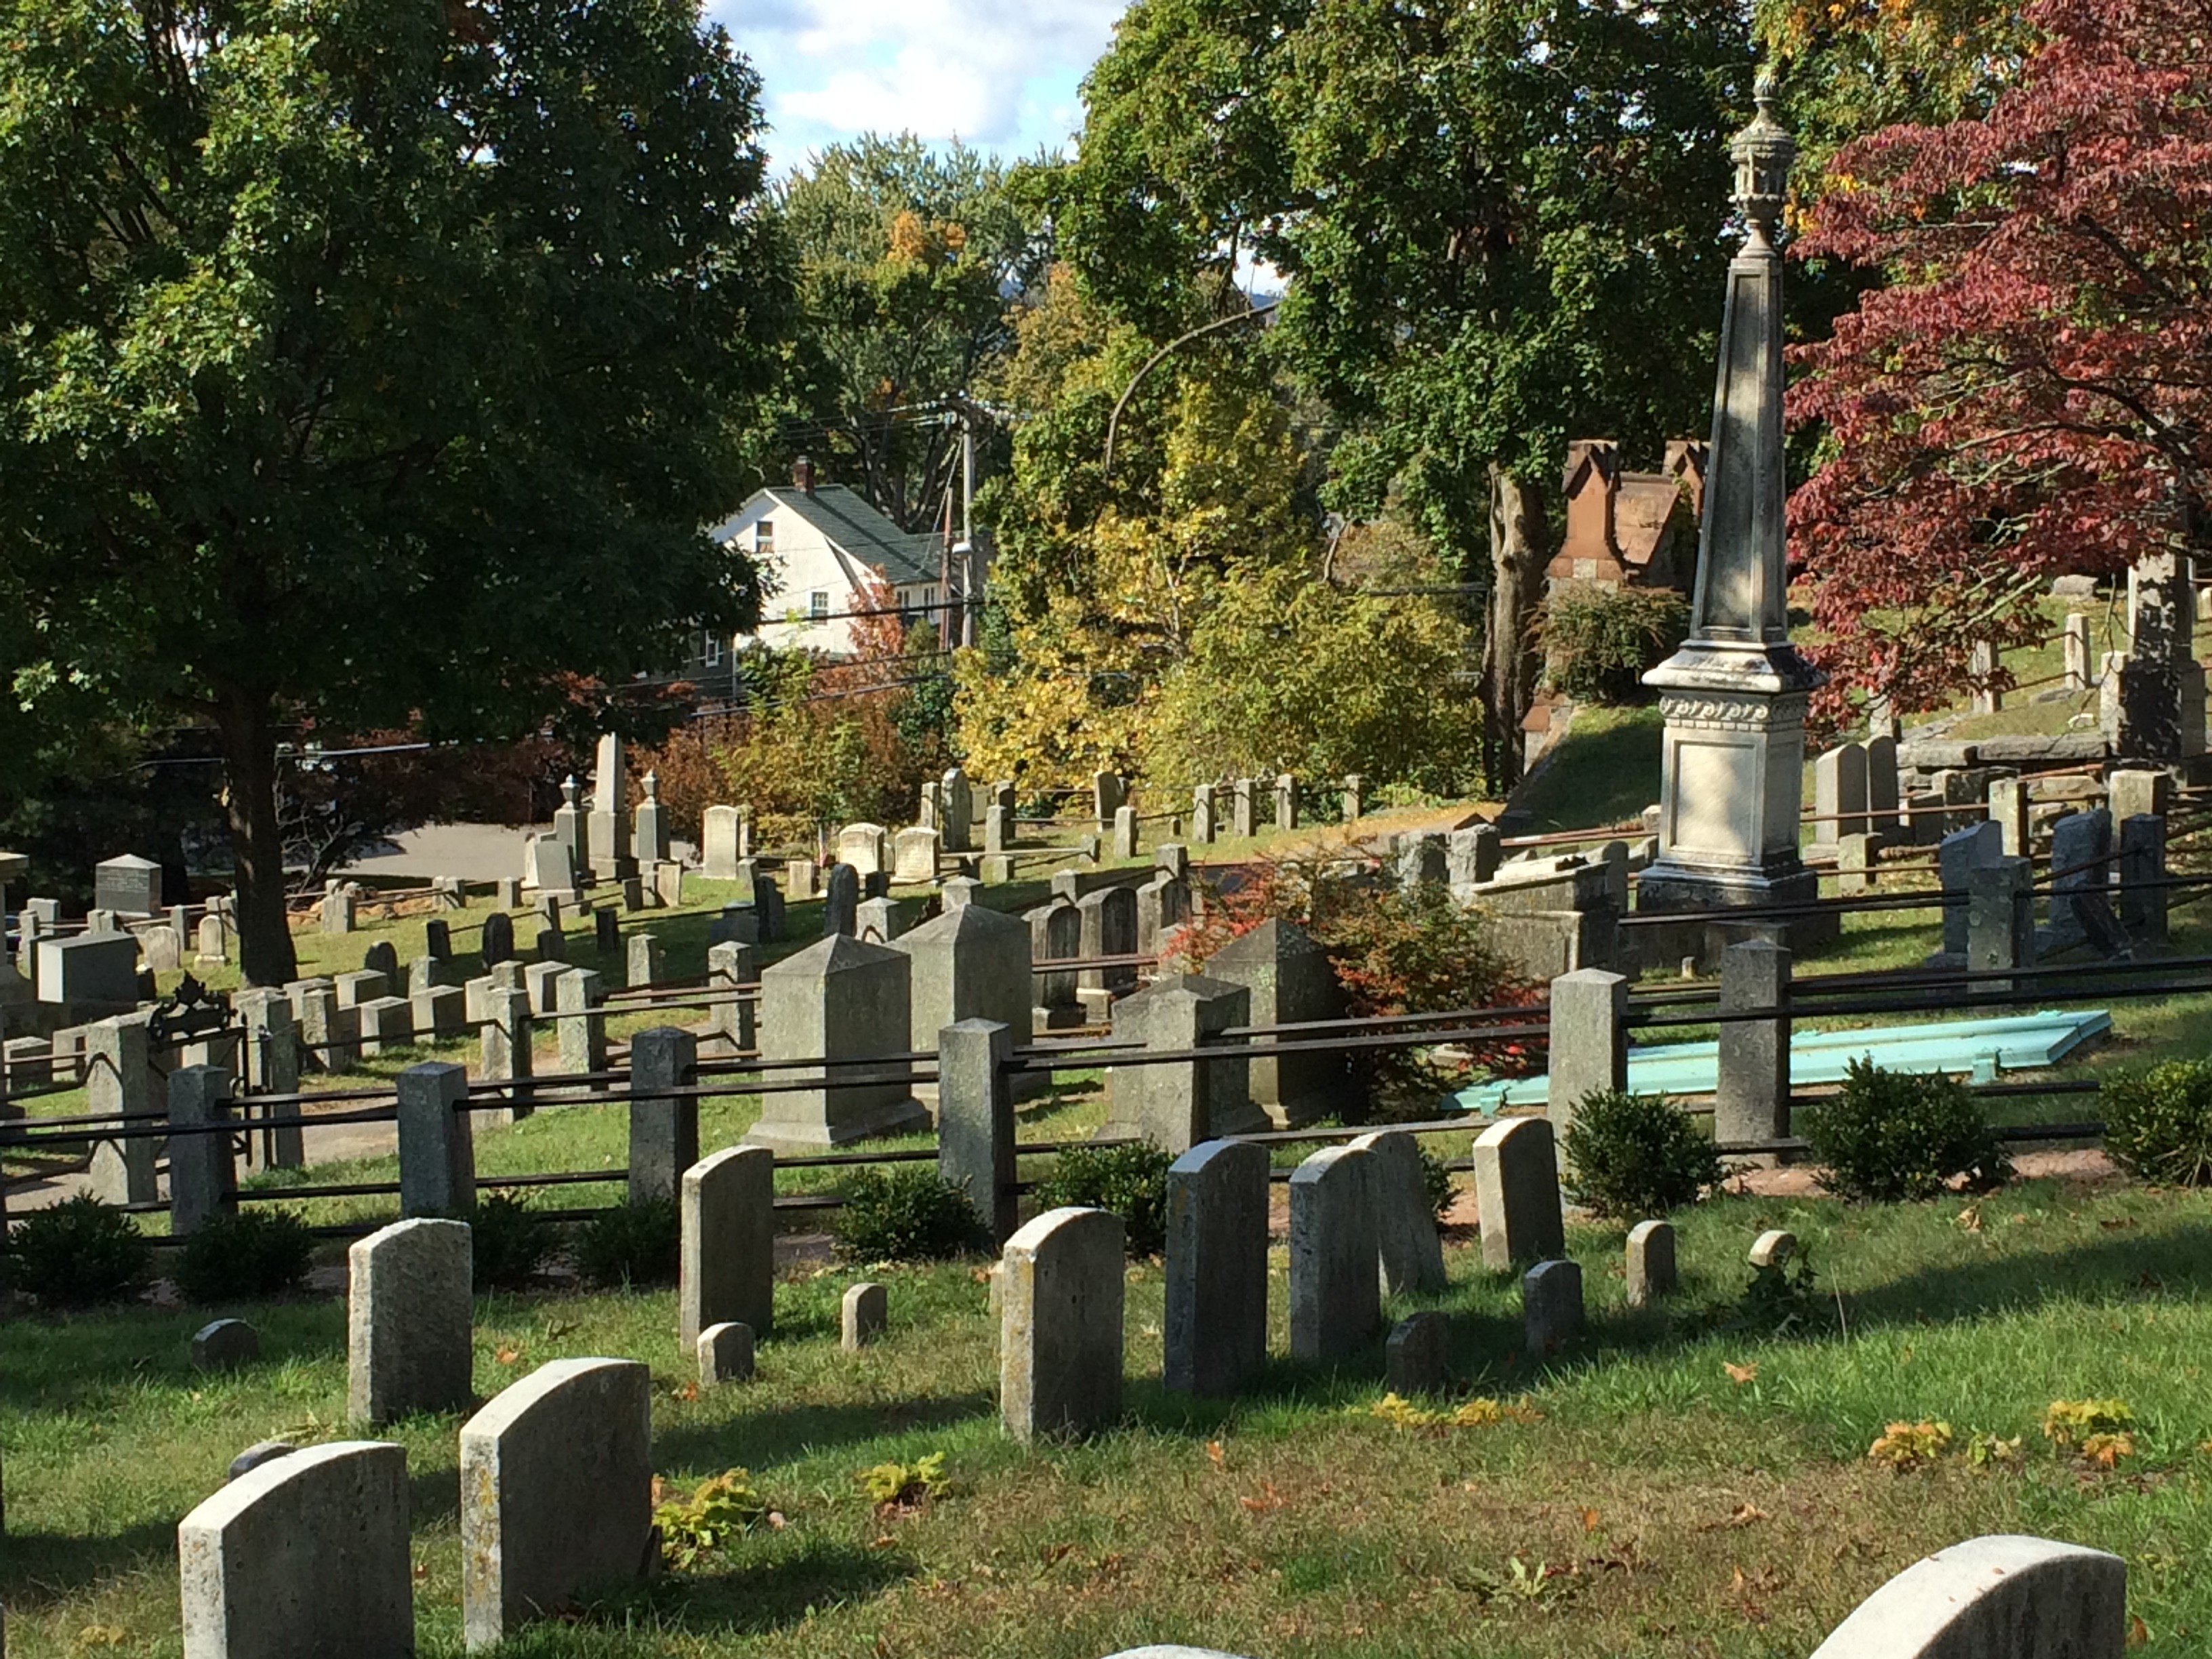 Just a few of the hundreds of graves at the 90-acre Sleepy Hollow Cemetery stand in the autumn sunshine. Some of its well known residents include Andrew Carnegie (1835-1919); Walter Chrysler (1875-1940); Samuel Gompers (1850-1924); Leona Helmsley (1920-2007); and Washington Irving (1783-1859), whose short story, “Legend of Sleepy Hollow, put the village on the map.